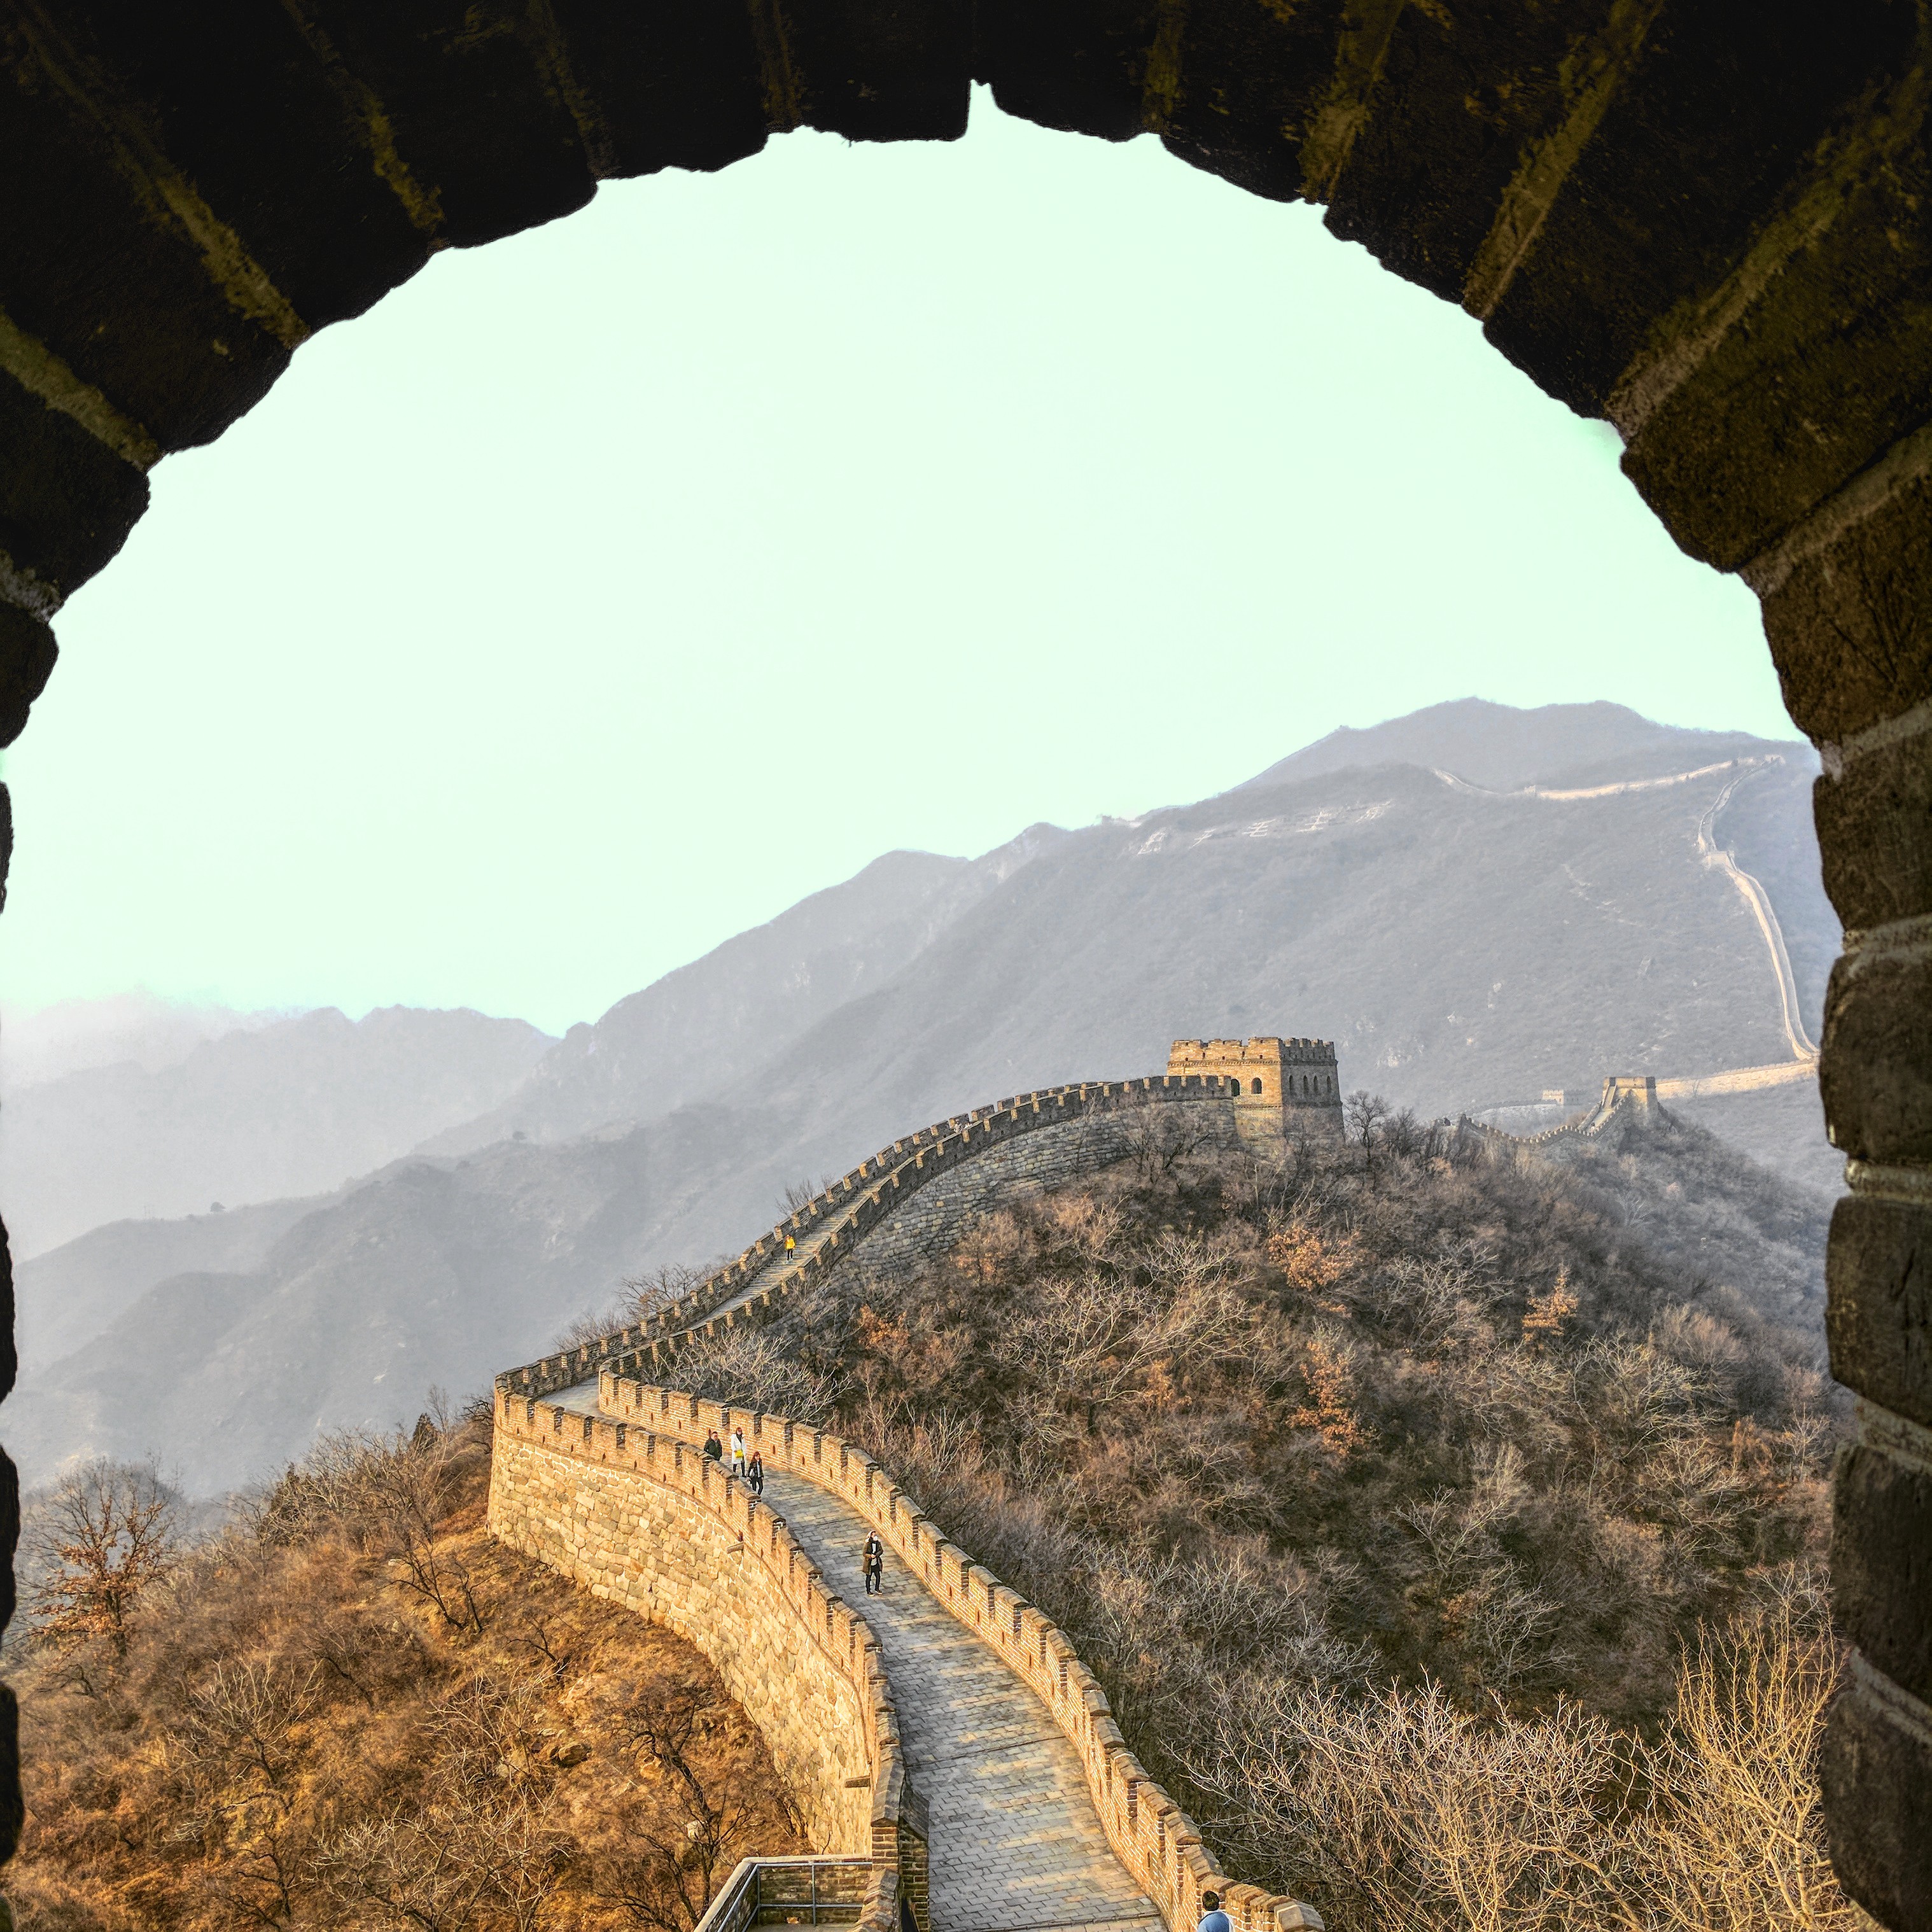 A view on the Great Chinese Wall